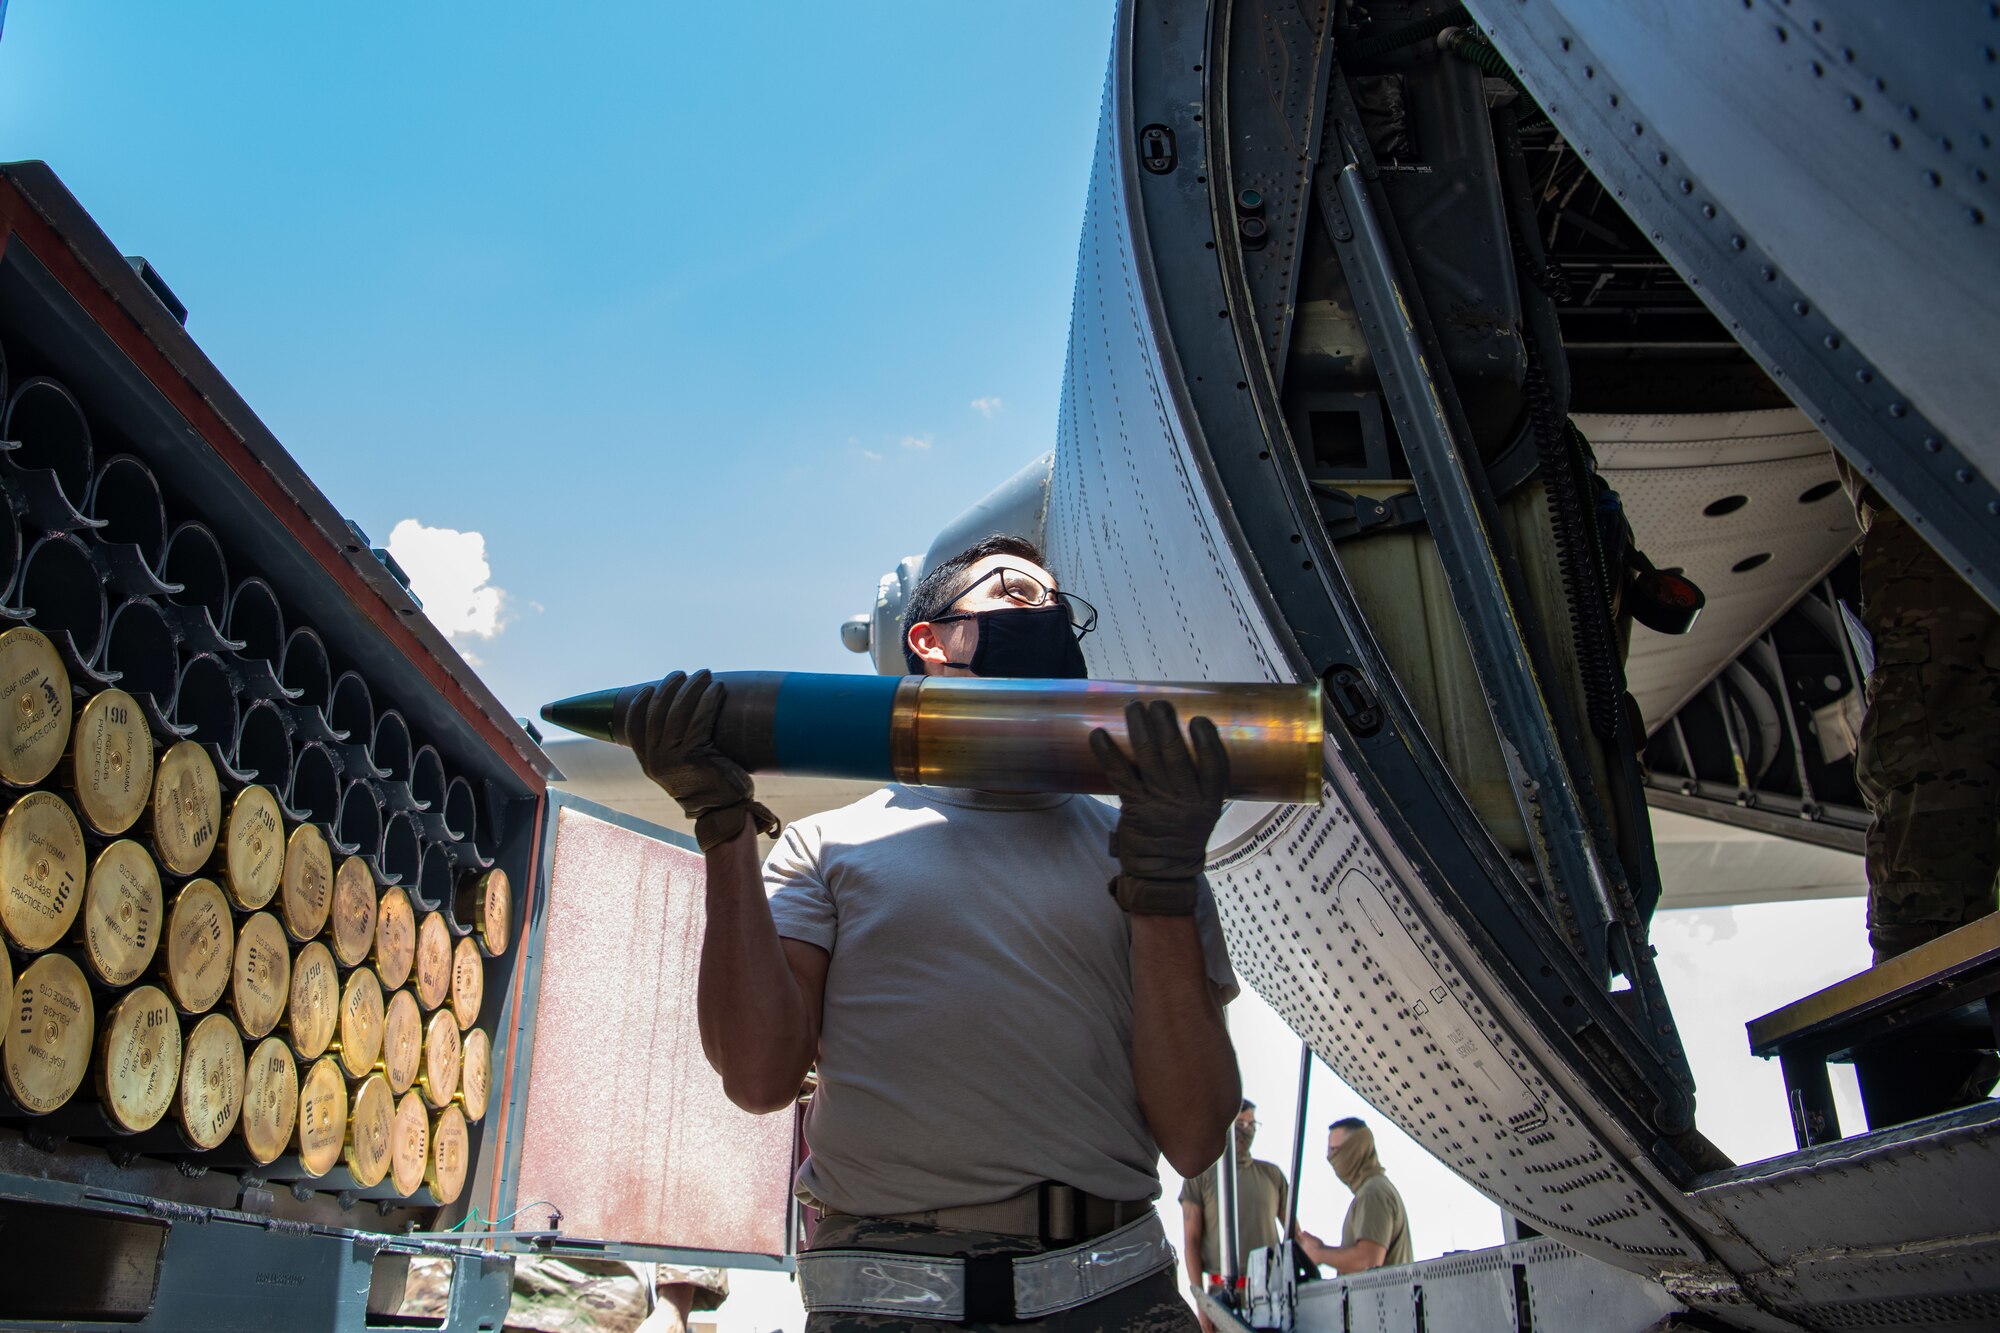 Staff Sgt. Wellington Parraga, a line delivery crew chief assigned to the 27th Special Operations Maintenance Squadron munitions flight, hands off a 105 MM round to a AC-130W Stinger II gunship aircraft’s crew to load for flight configuration prior to a training sortie at Cannon Air Force Base, N.M., July 22, 2020. The 27 SOMXS MUNS flight provides all the munitions needed for the base’s flying units to conduct their combat readiness training. (U.S. Air Force photo by Senior Airman Maxwell Daigle)